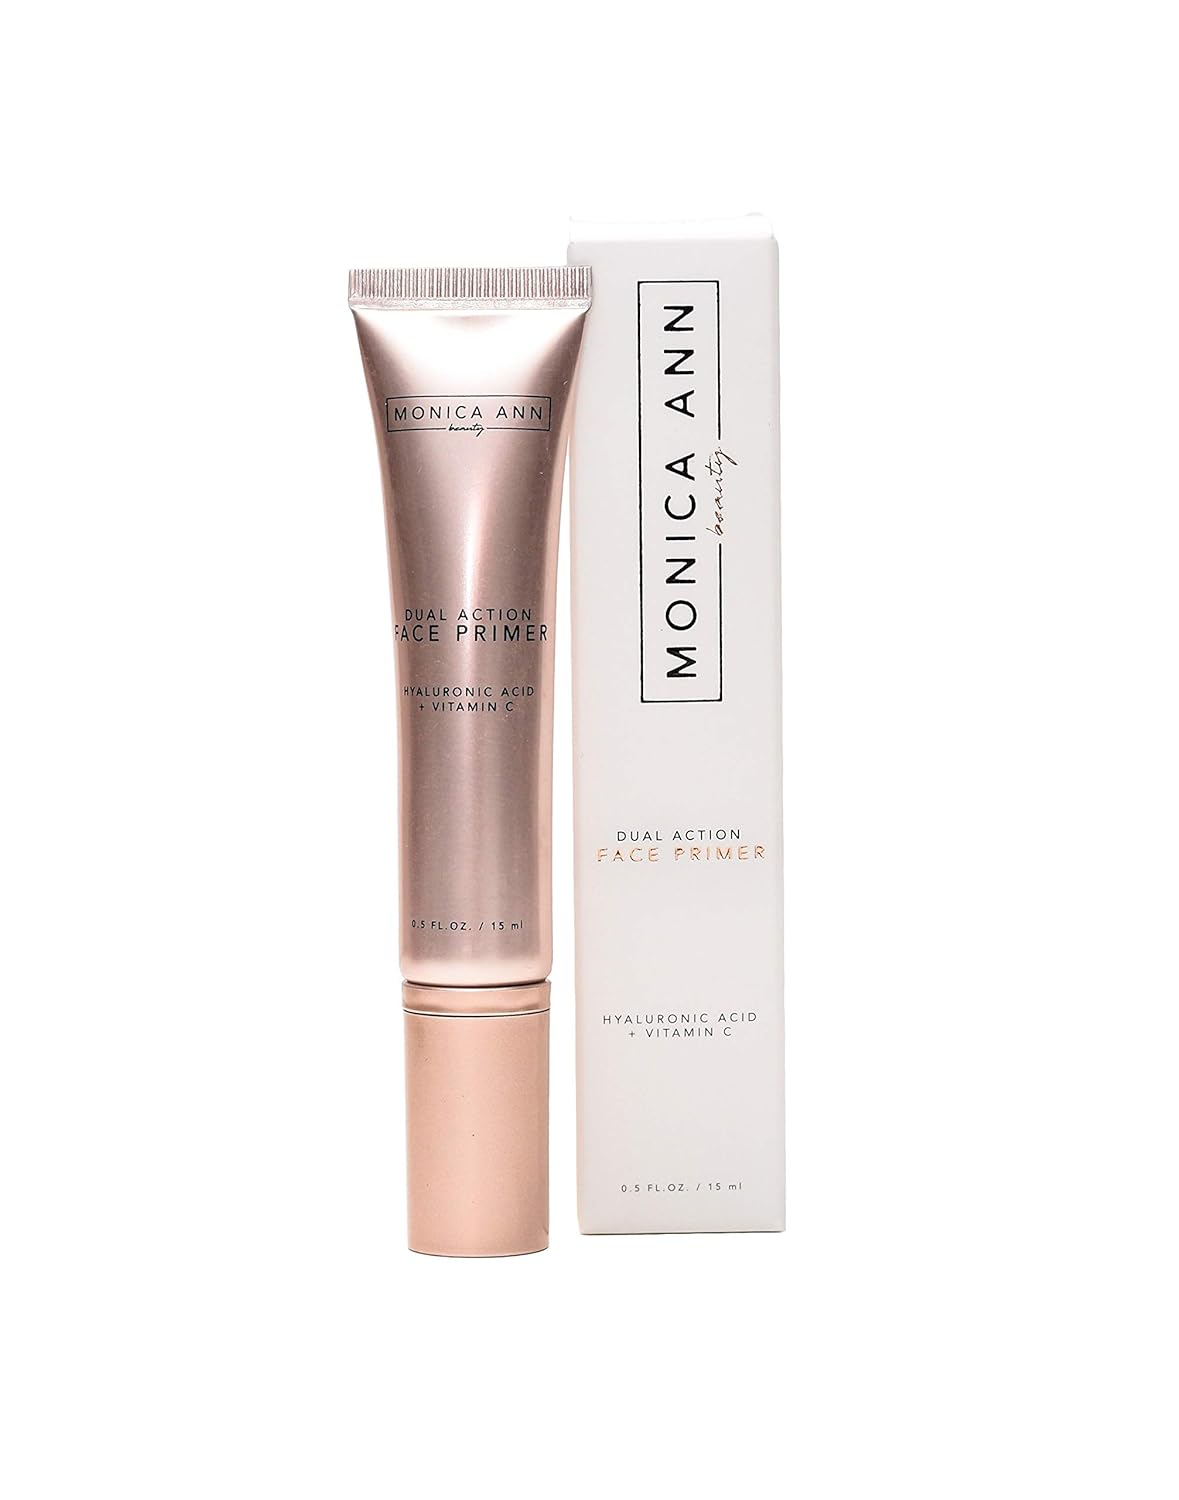  Dual-Action Face Primer (Vitamin C and Hyaluronic Acid), Monica Ann Beauty; Foundation Primer 15mL